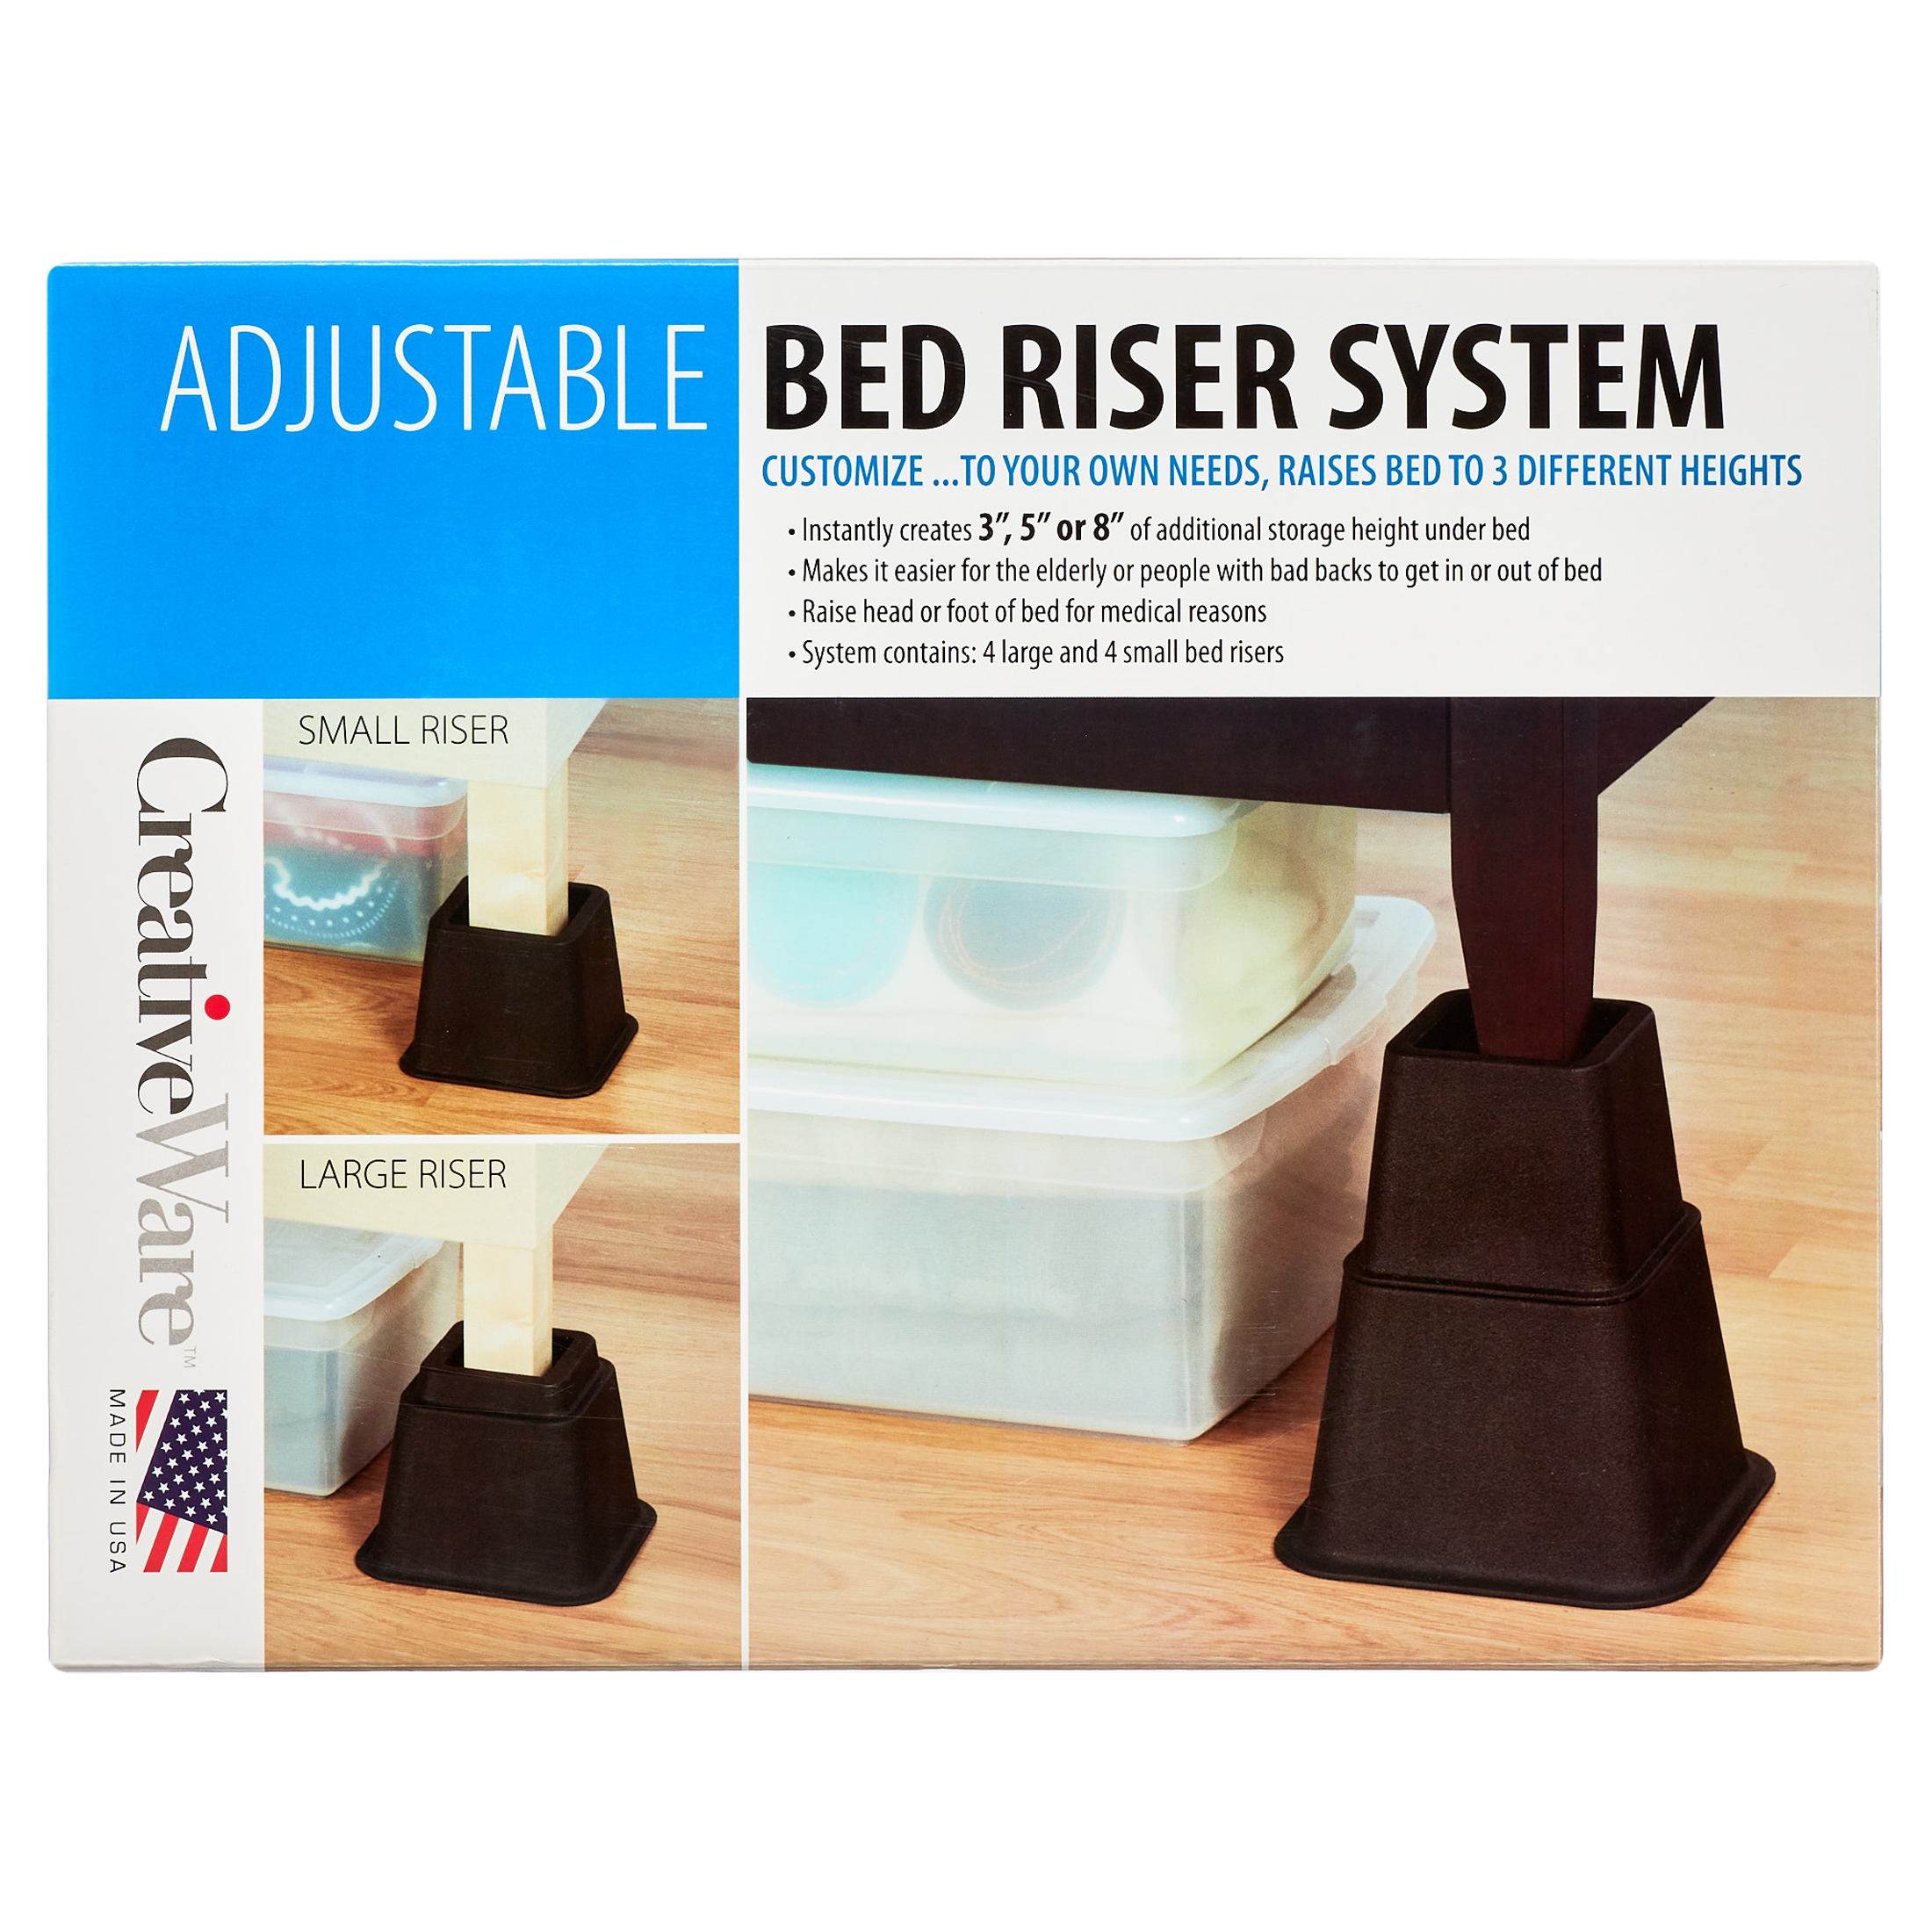 CreativeWare Plastic, Adjustable Bed Riser System in Black, 8 Count - image 5 of 9